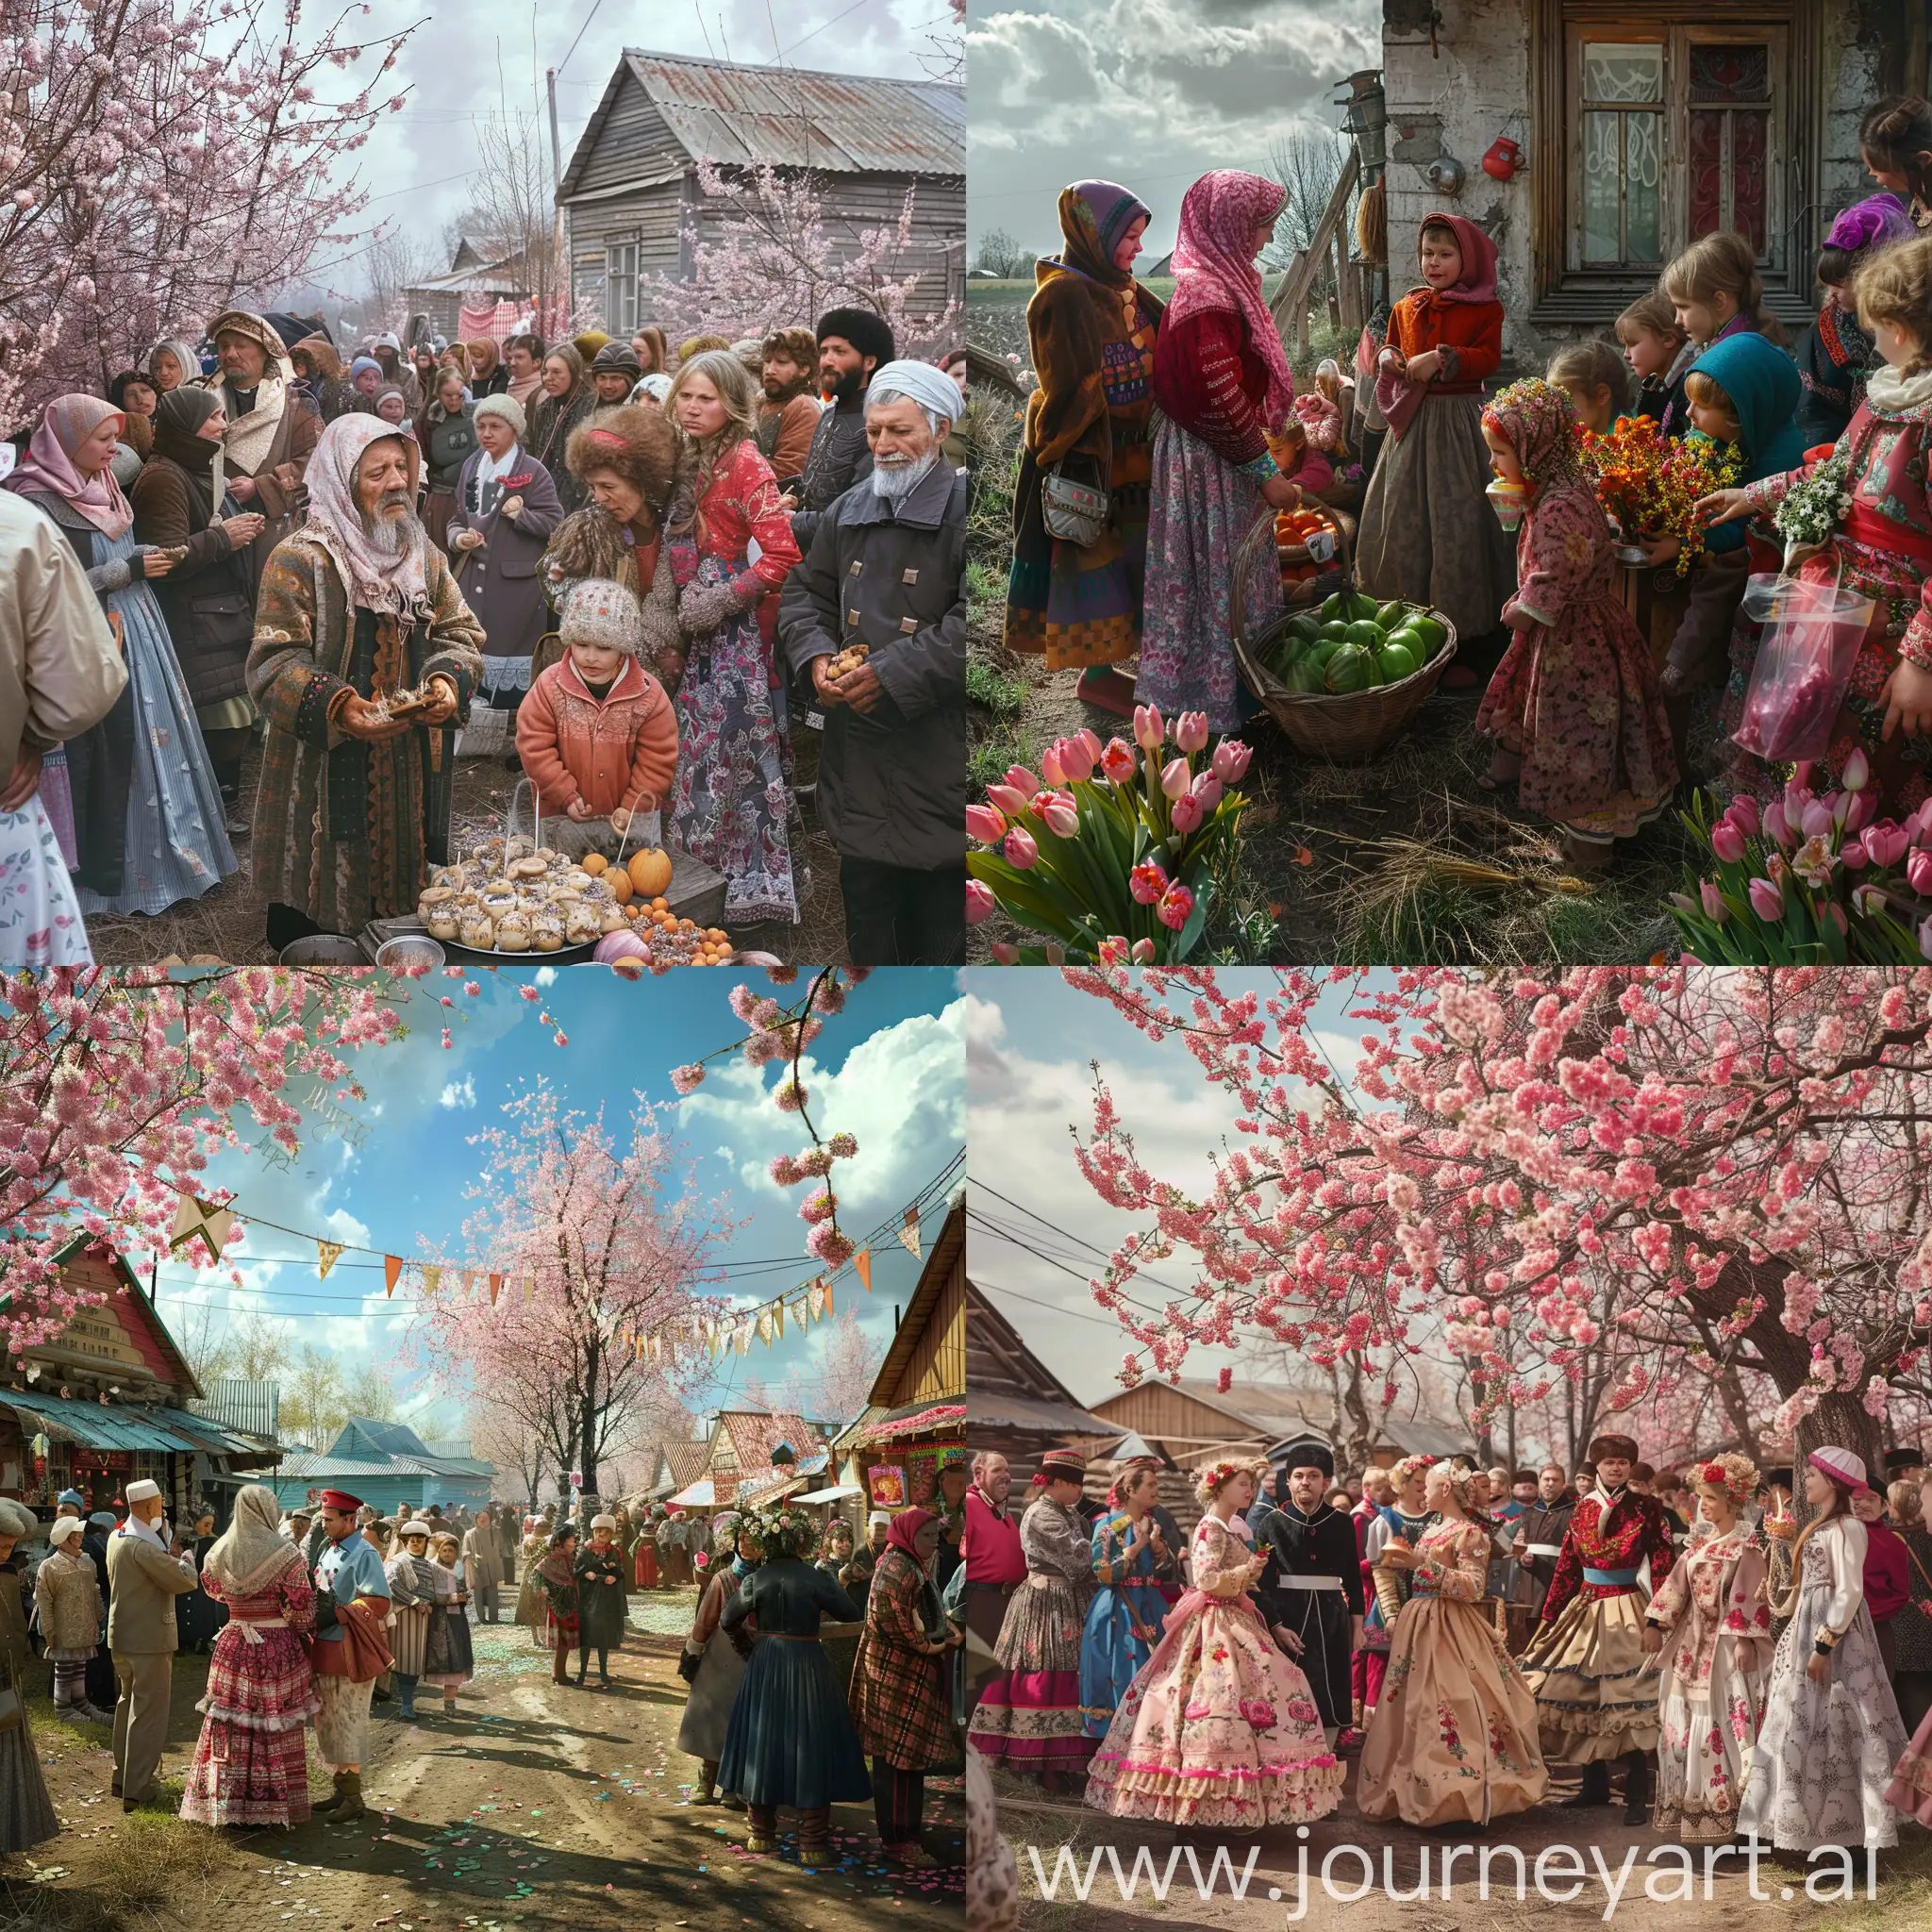 Spring-Festival-Celebration-in-a-Russian-Village-Hyperrealism-Photography-in-High-Resolution